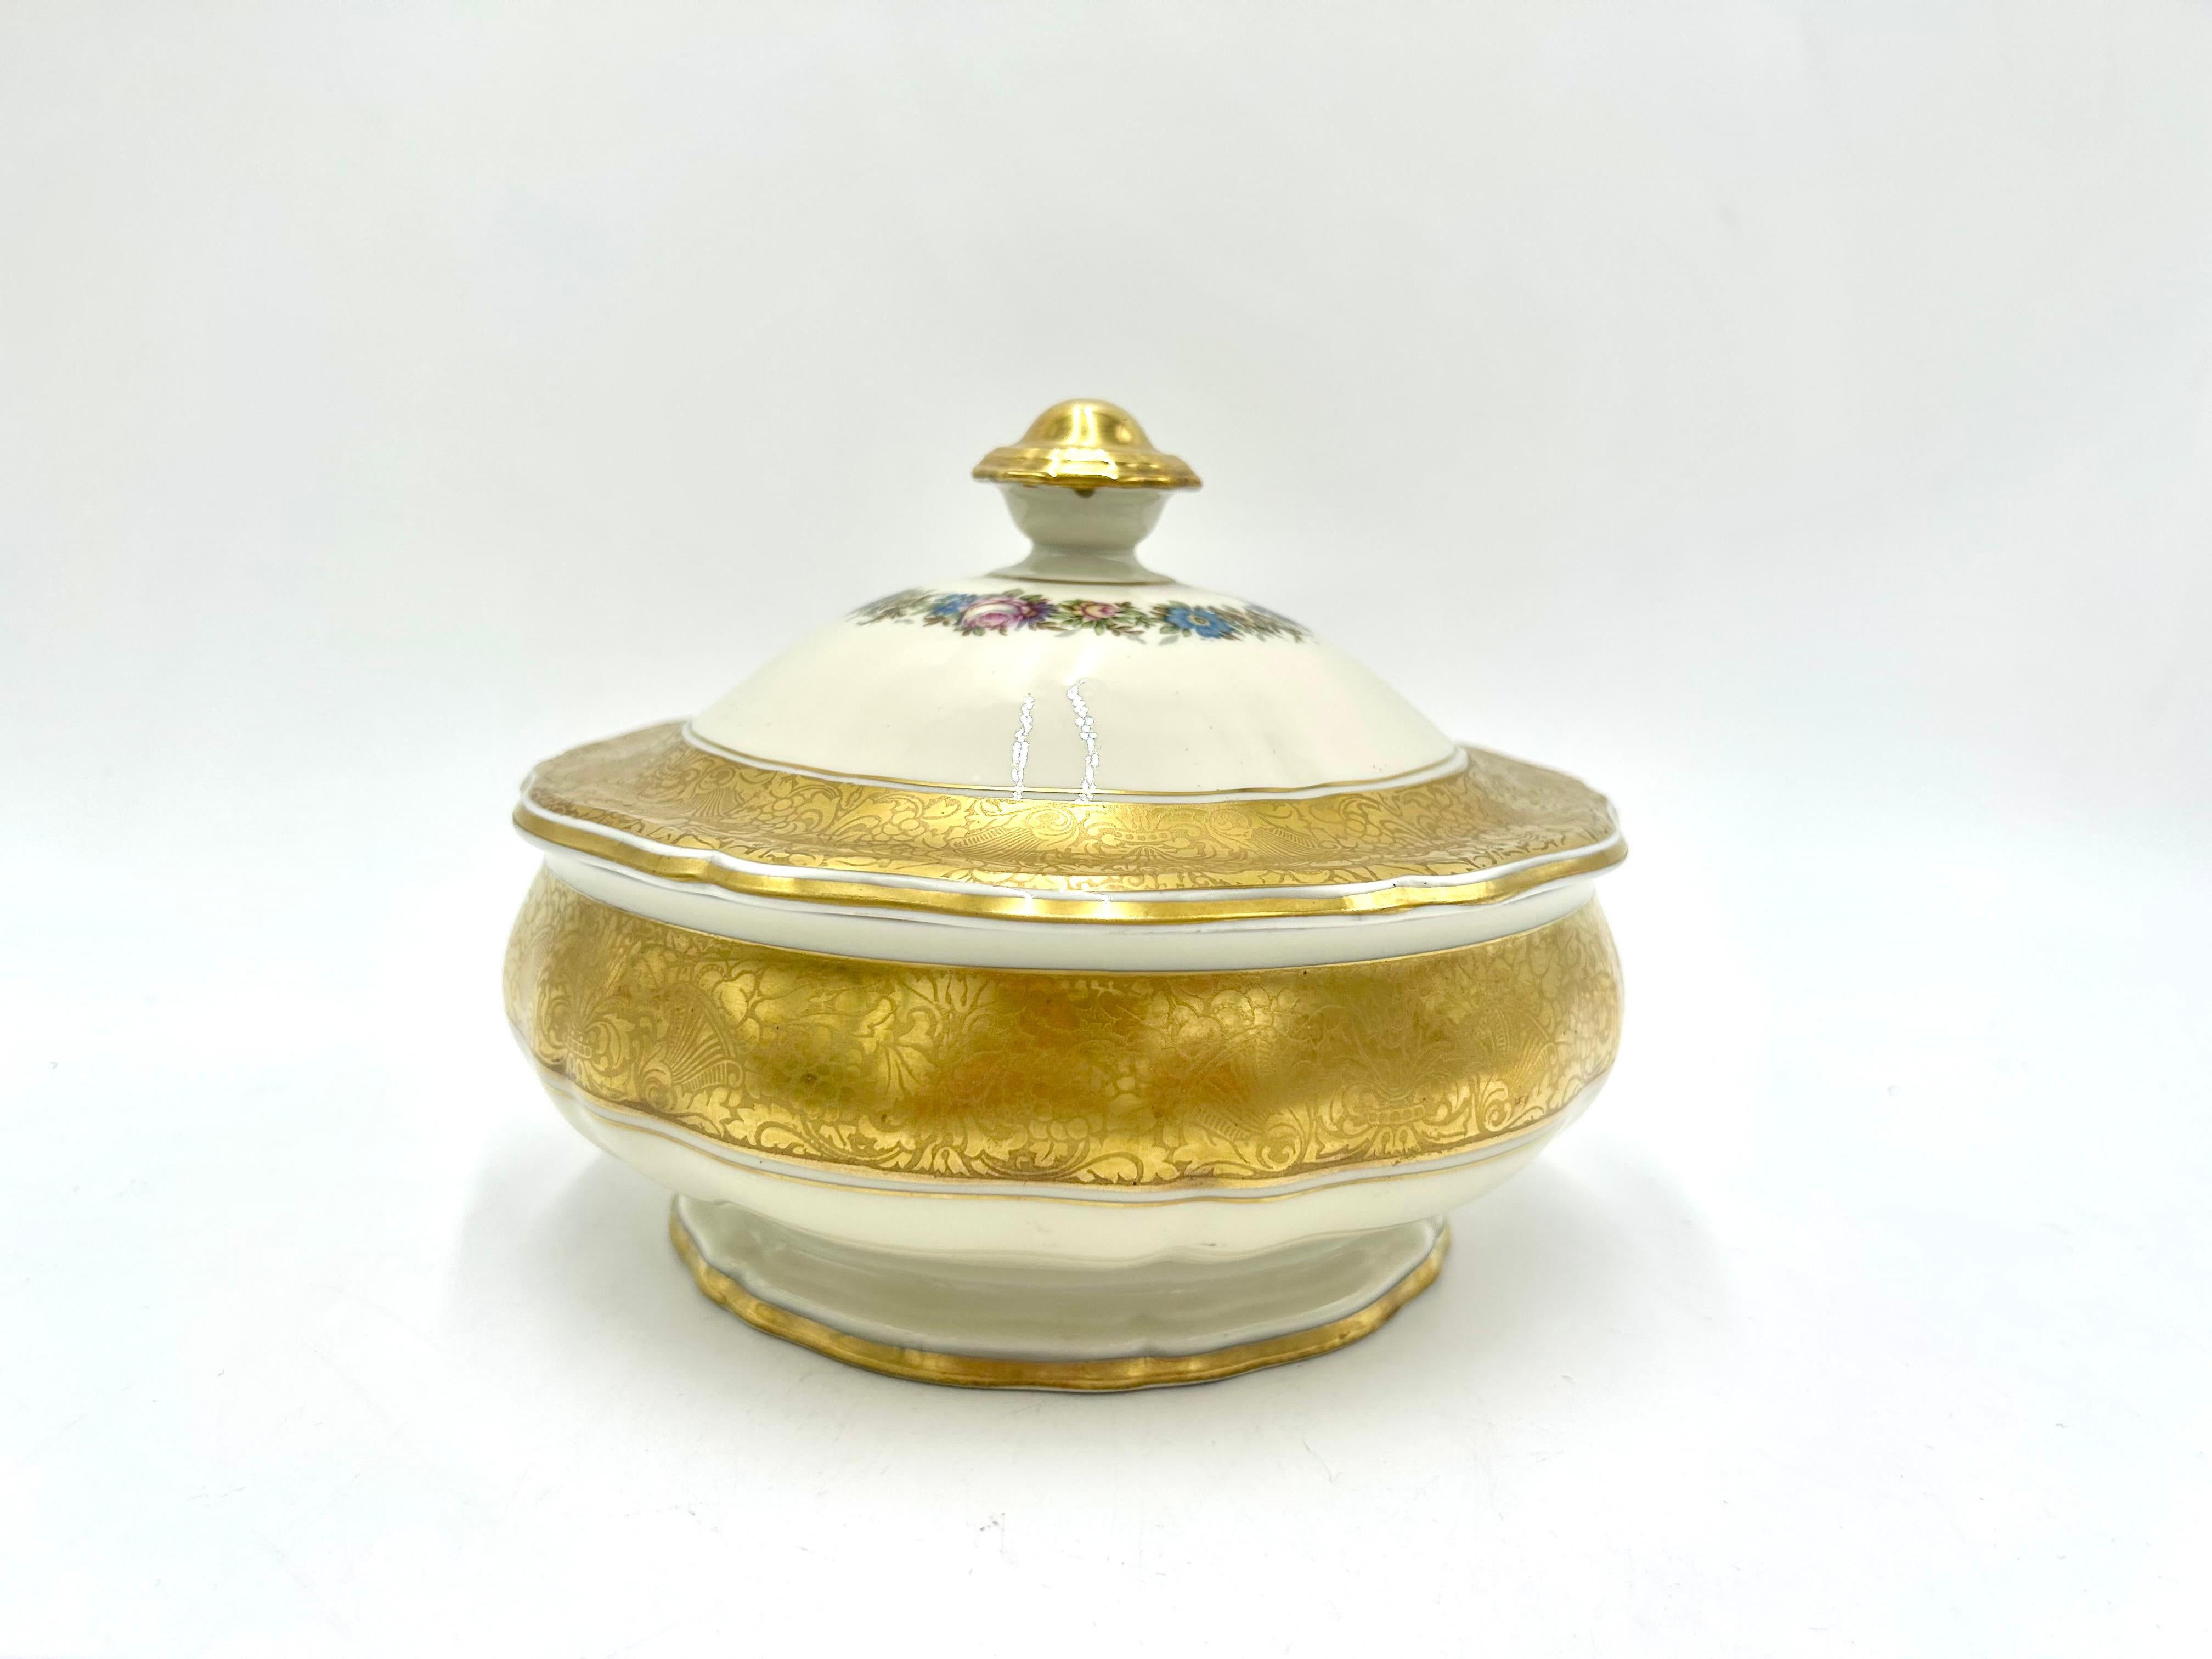 Porcelain casket with a lid - chocolate box from the Chippendale collection, made in Germany by the excellent Rosenthal label. Ecru porcelain decorated with gilding on the edges and a delicate motif of a bouquet of flowers on the lid. The product is